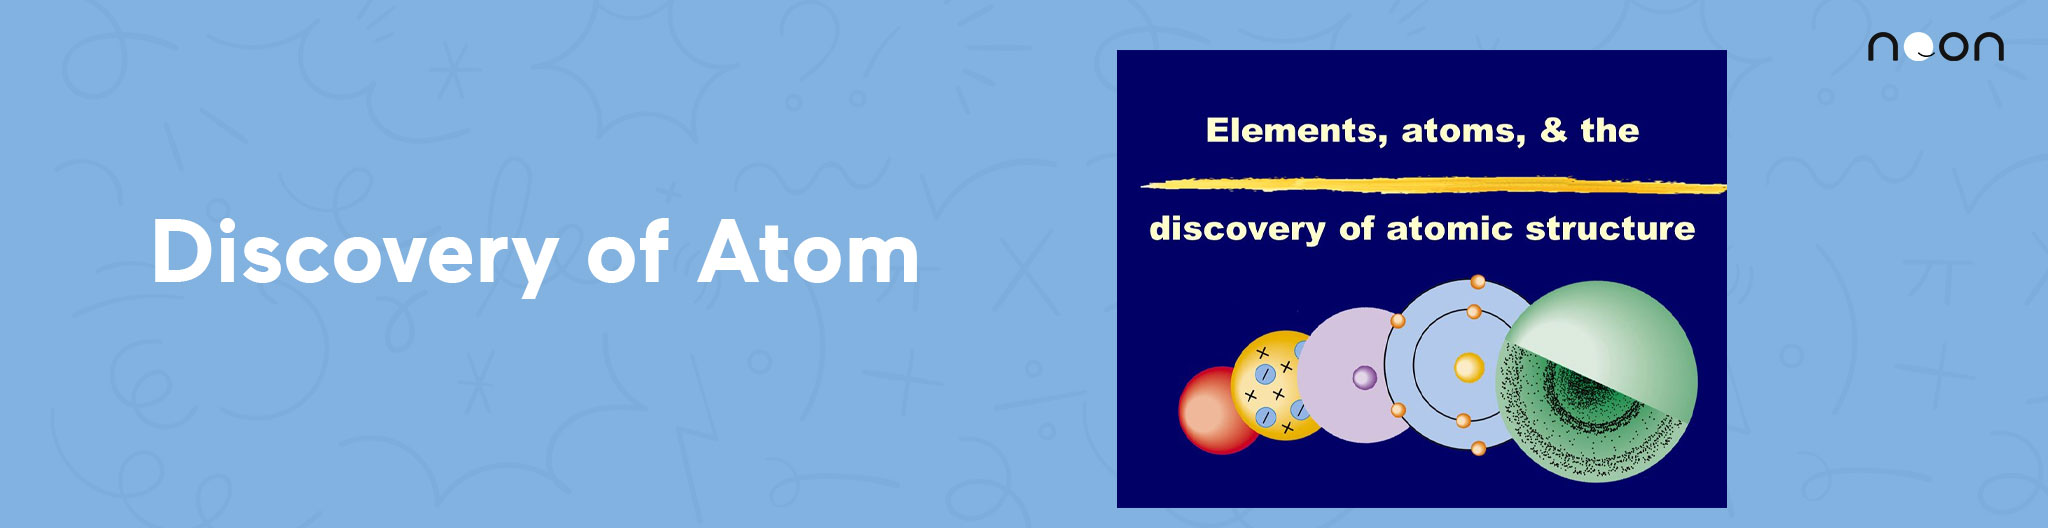 Discovery of Atom